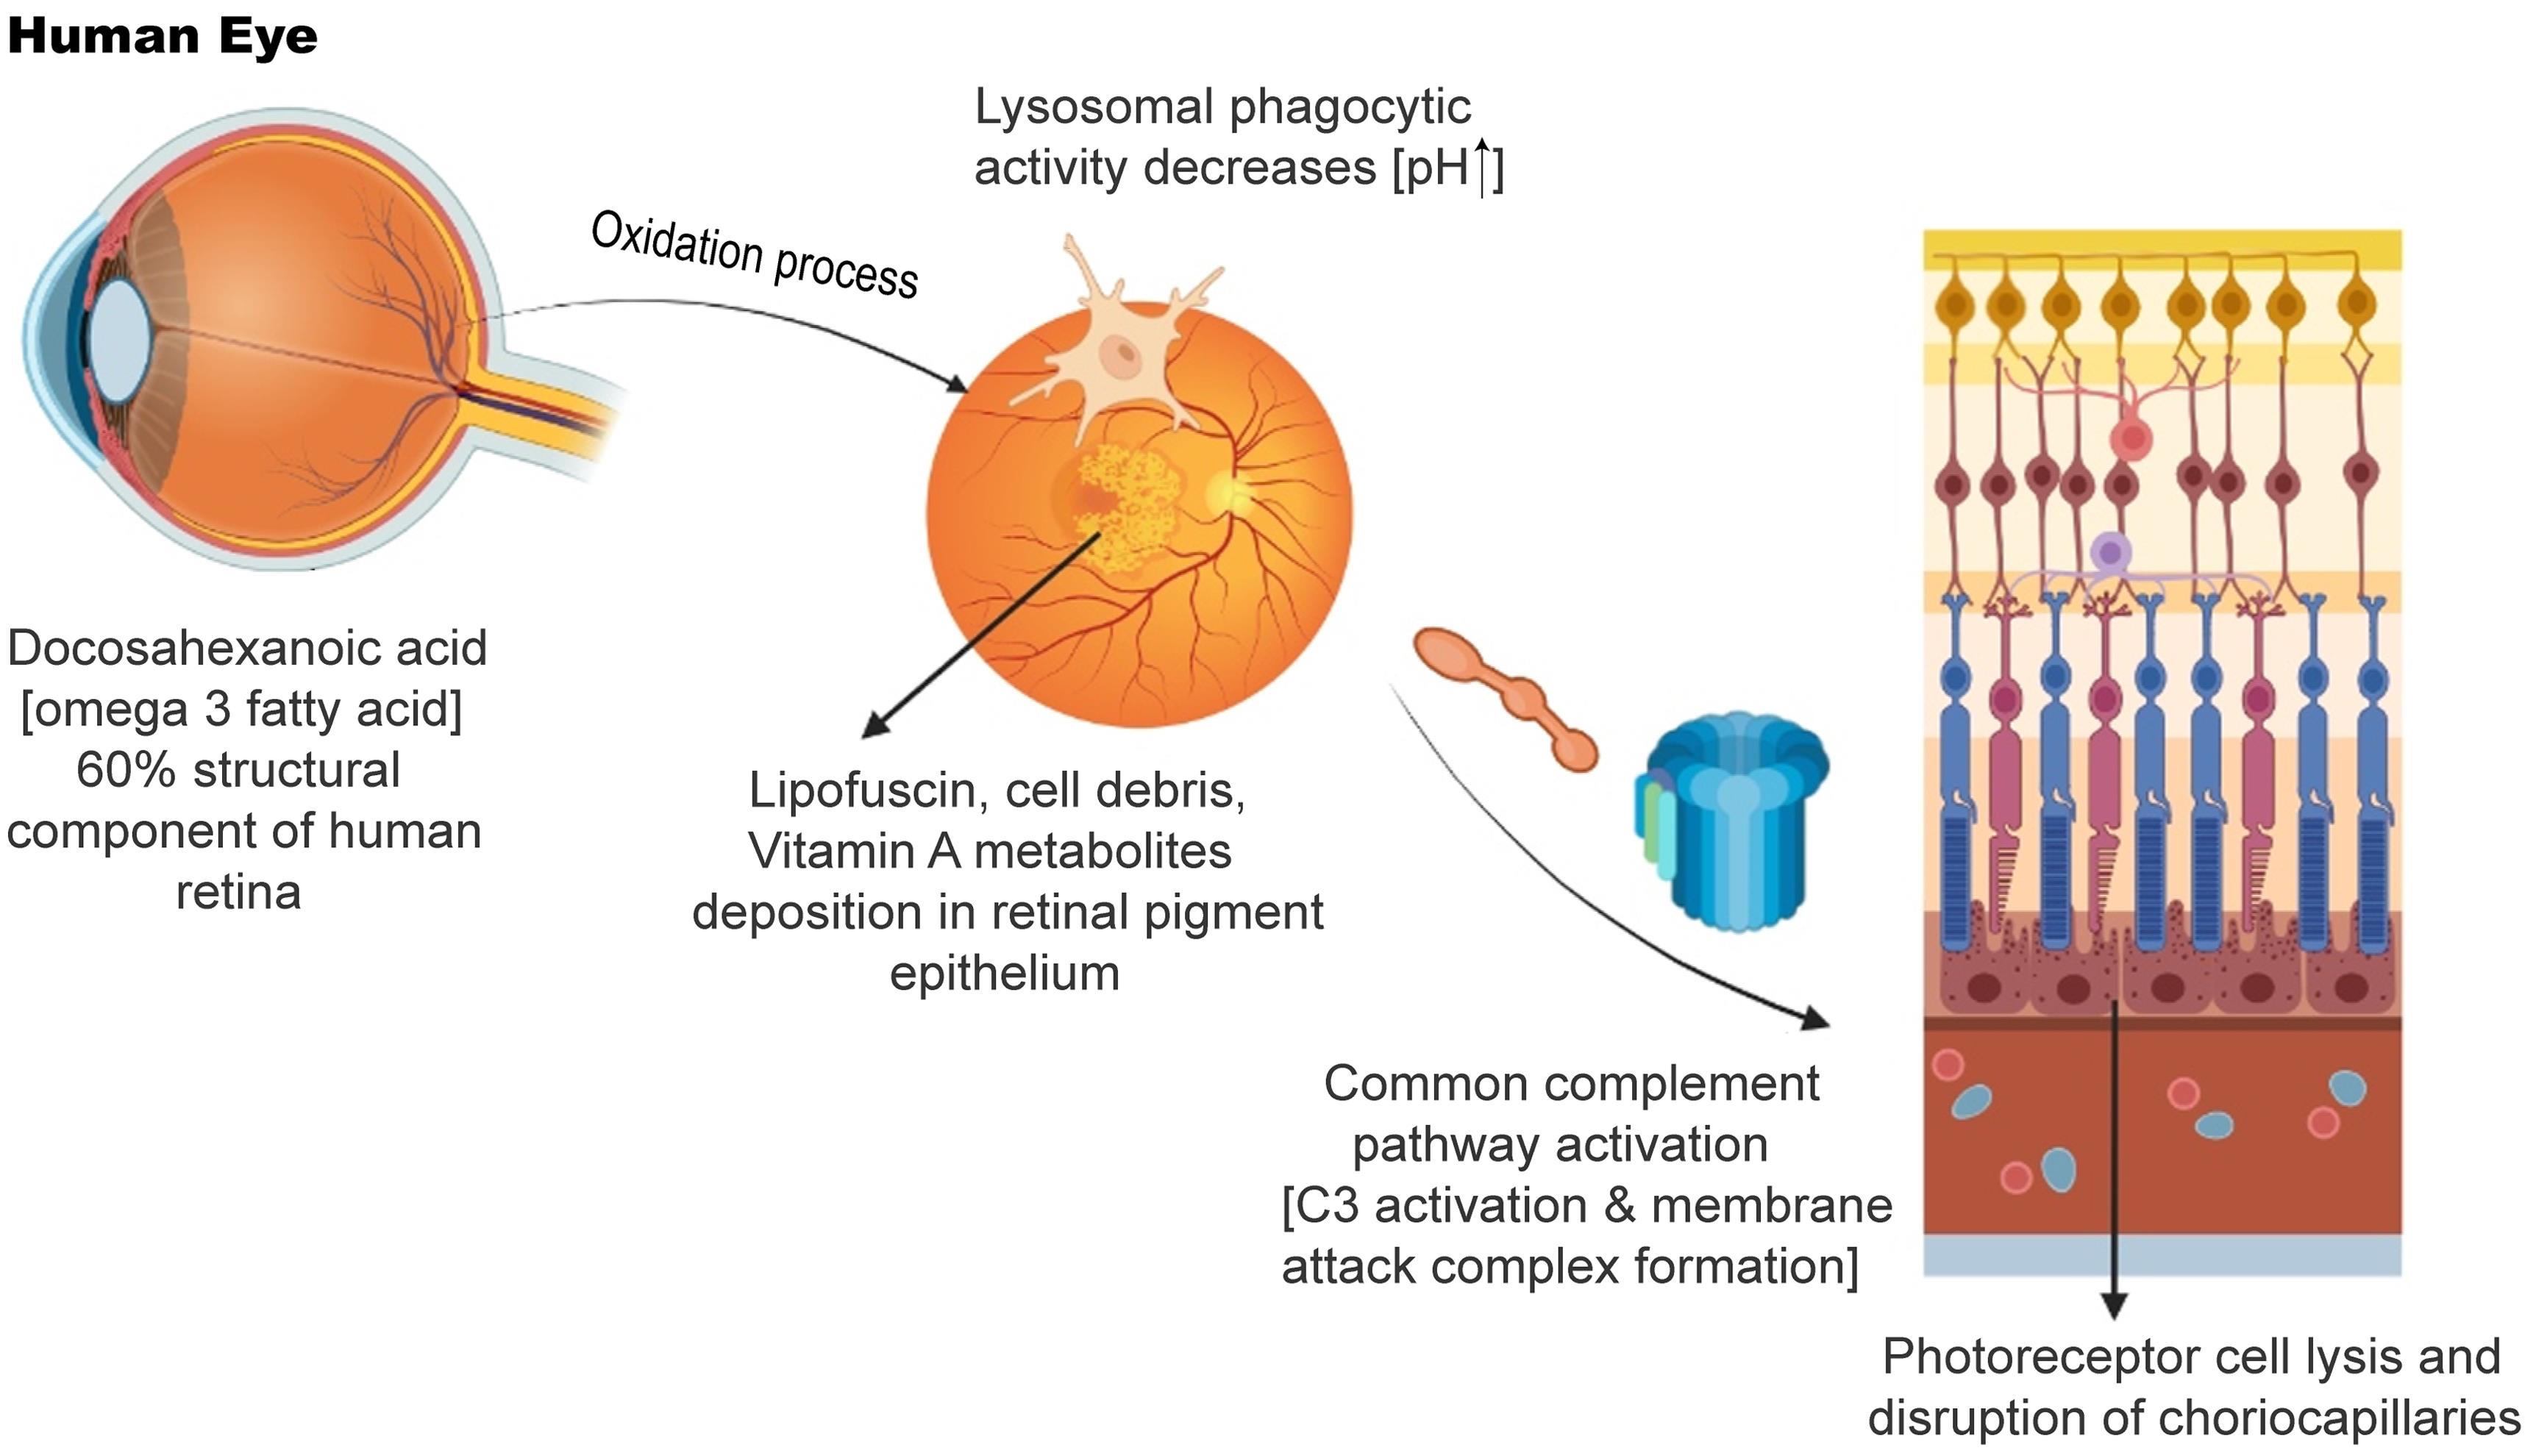 Pathogenesis of dry age related macular degeneration and geographical atrophy.